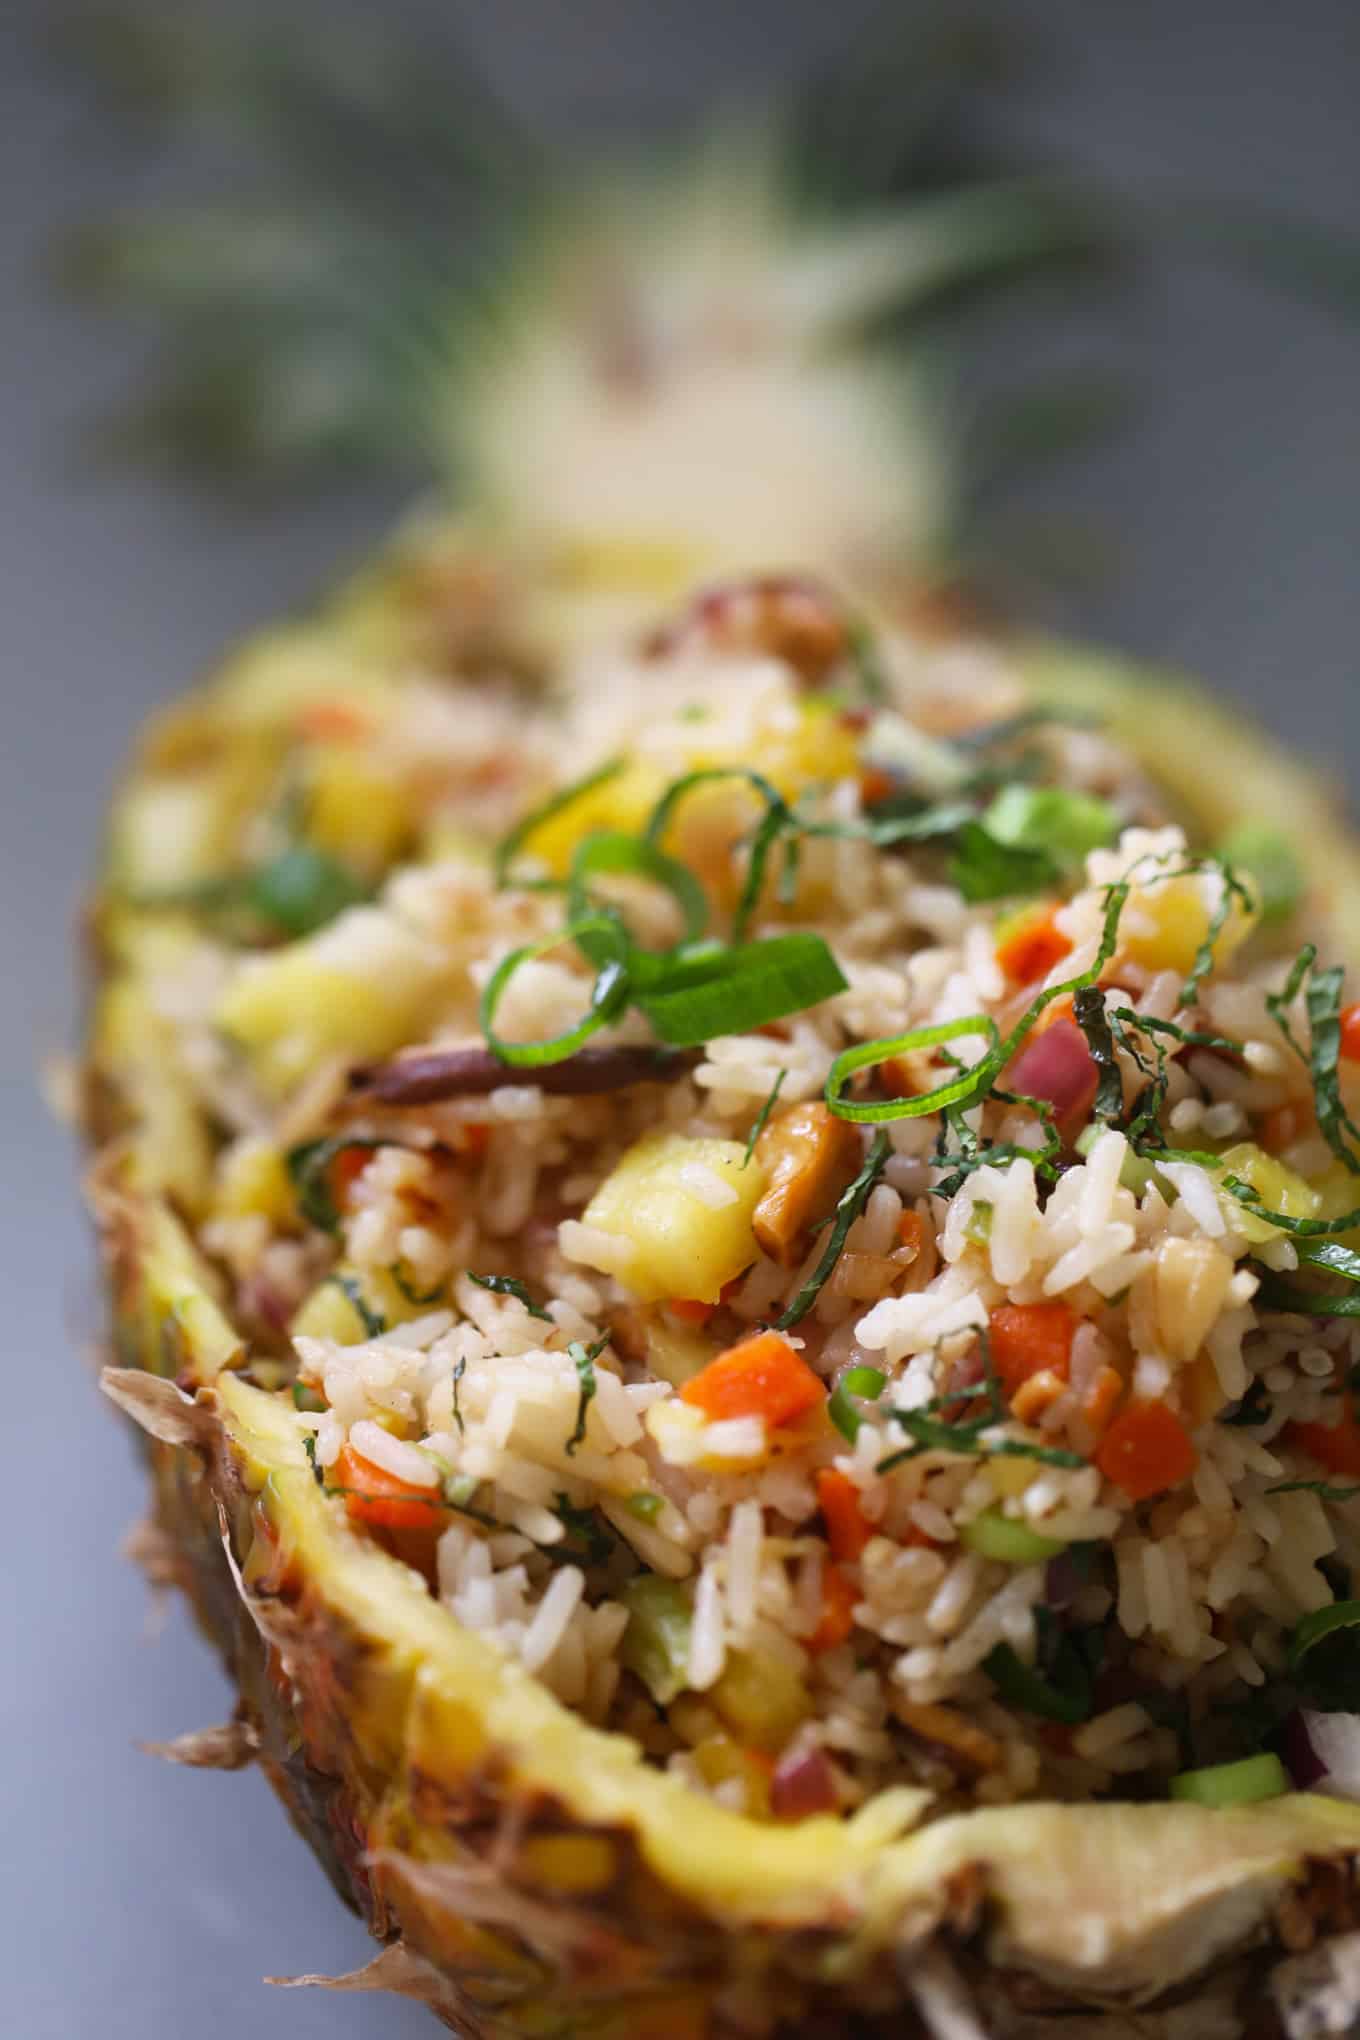 A pineapple half filled with fried rice and vegetables.